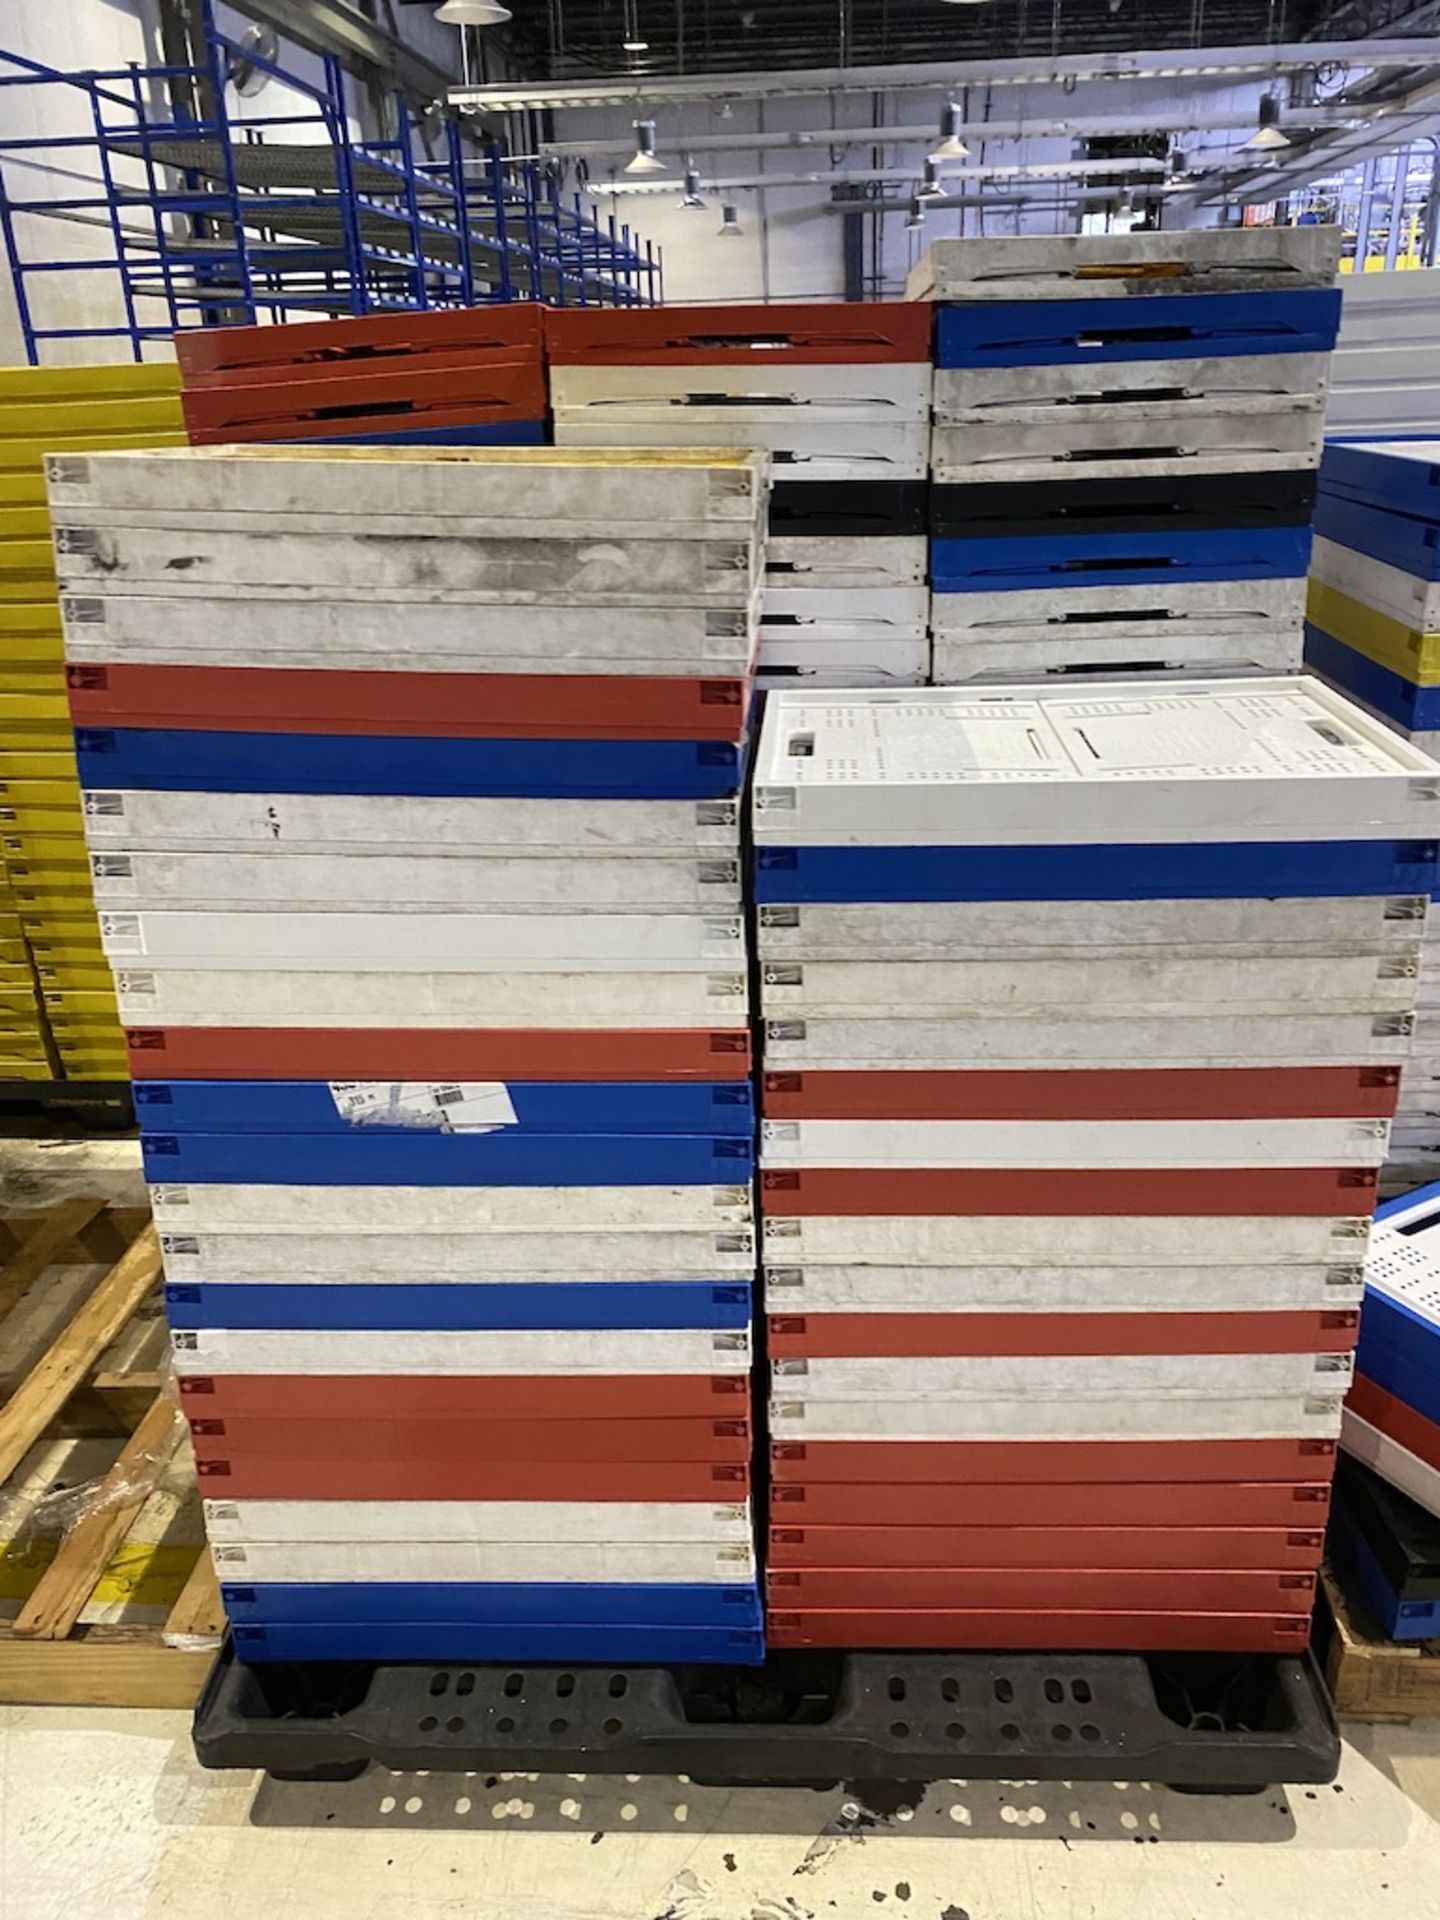 Qty. 8 - Pallets of Collapsible Parts Crates, Crate Dimensions approx. 24" x 16" x 12" High - Image 4 of 8